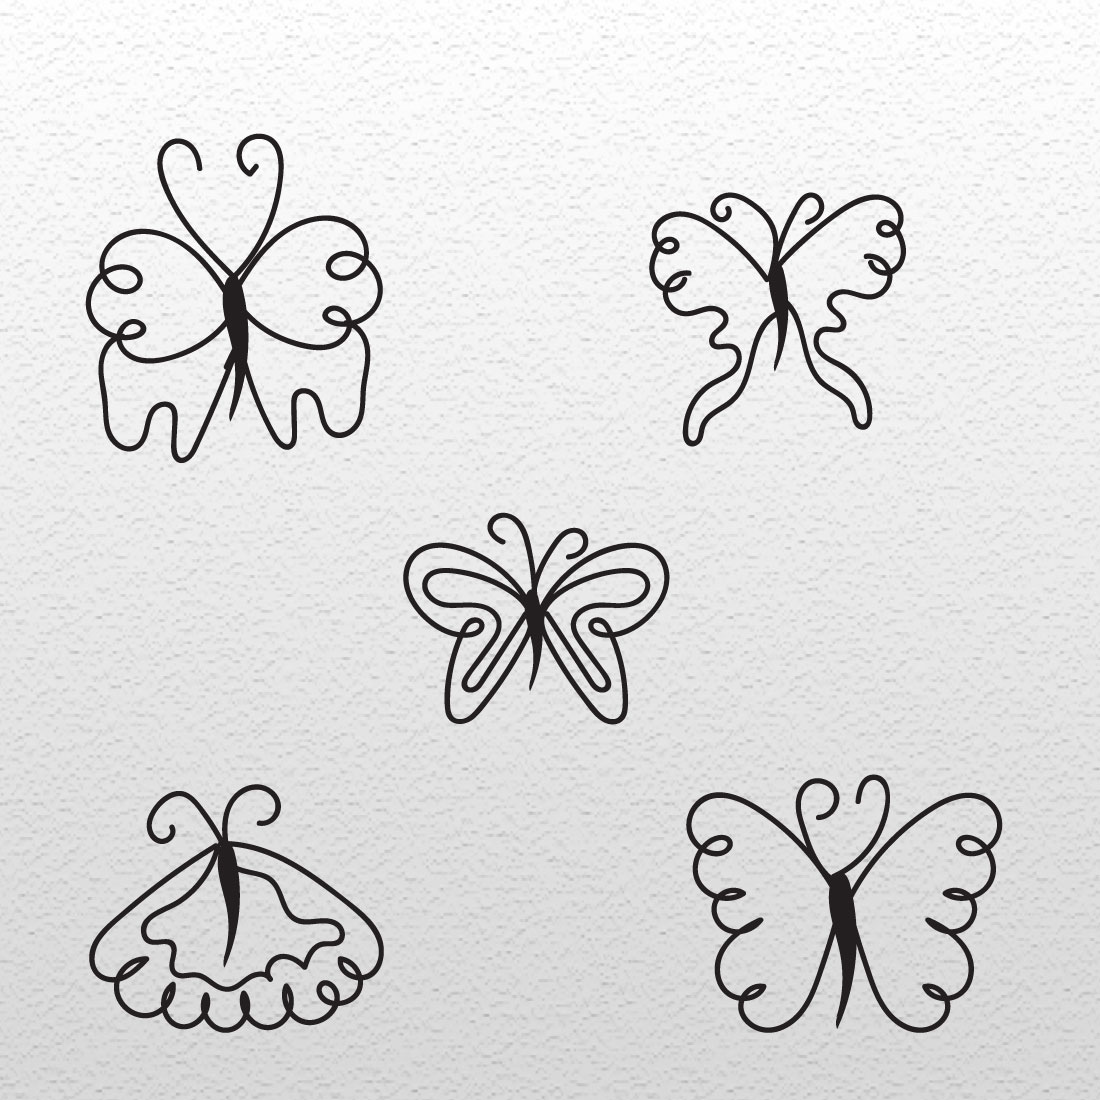 Four different types of butterflies on a white background.